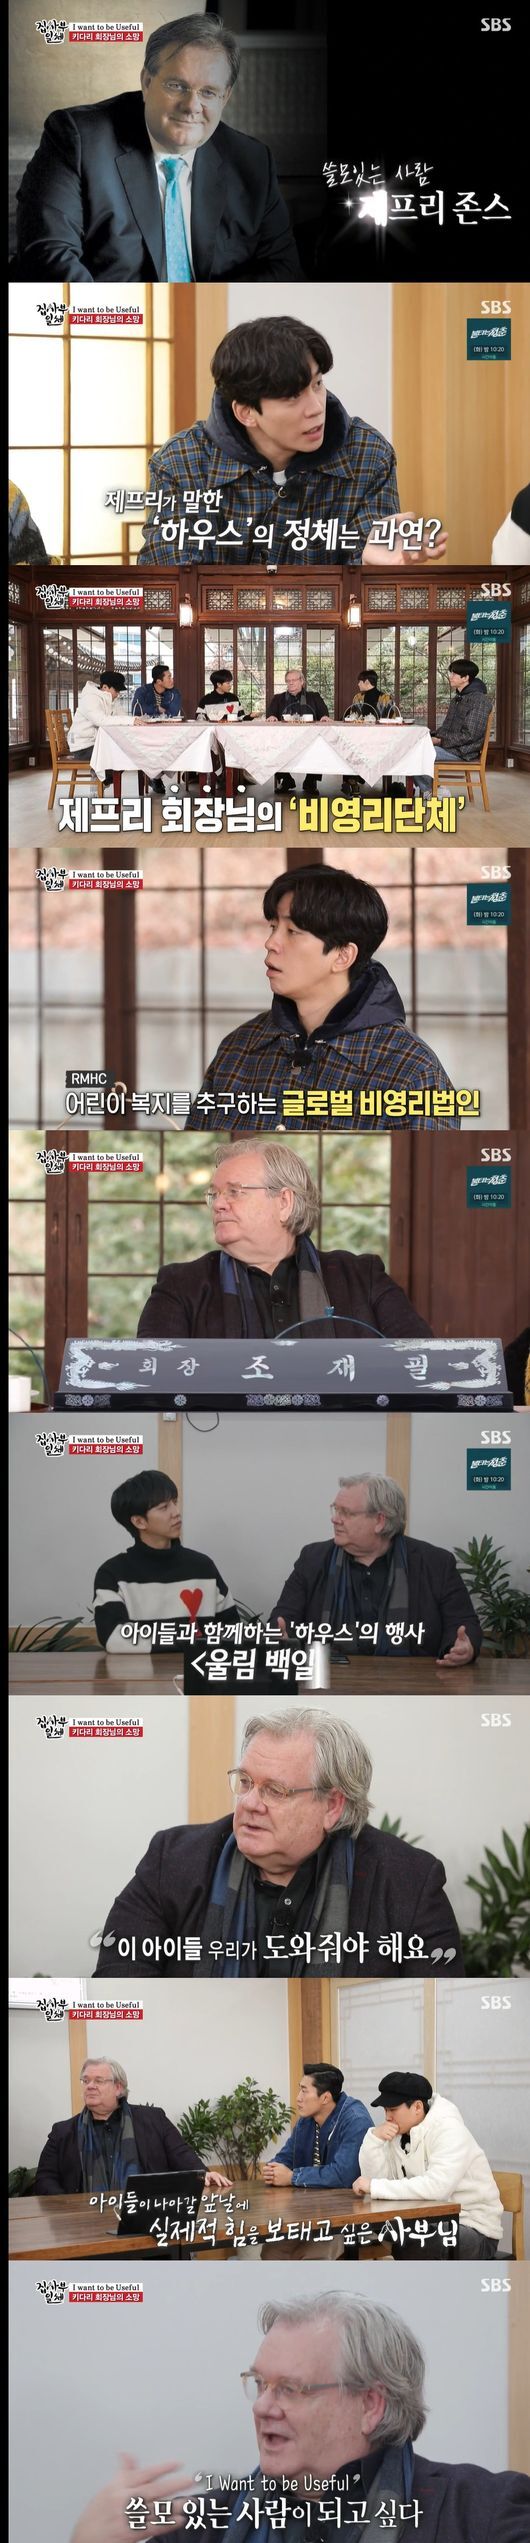 Jeffrey Quincy Jones, a blue-eyed Korean who opened the first house in Korea at All The Butlers, showed good influence and predicted Koreas GDP growth.In the SBS entertainment All The Butlers broadcast on the 17th, All The Butlers Roadway followed by Master Jeffrey Quincy Jones.Members gathered in front of the hanok to meet the new master on this day.The production team said, The master who is afraid of Korea is the master, he said. It is the master who is known as the largest law firm in Korea and the richest person in the title.All The Butlers foresaw the first legal master, and the second is the chairman of the nonprofit welfare organization foundation.The third time, he was the chairman of the United States of America Chamber of Commerce and Industry, and made the members more curious.The production team released the masters name, and the master Cho Jae-pil appeared on a motorcycle. He introduced himself as Korea name Cho Jae-pil, original name Jeffrey Quincy Jones.He then decided to listen to the story of the title-rich chairman, Jeffrey Quincy Jones, who moved indoors and asked why he stepped on the ground in Korea in 1971.I visited for volunteer activities as a college student, when I arrived at Gimpo Airport on August 15, 1971, when I had only a field around me, he said. I felt that the smell of manure was home, but it was my first time, but I felt familiar and warm. I felt like I was a Korean person in my past life.When asked about what happened to Korea law firm Lawyer, he said, After the Korean War, the problem of separated families was severe in 70 years.Thats what Memory did yesterday, and after two years of service, I went back to United States of America, and I thought Id come back, I felt like I wanted to be a psychiatrist and treat the pain of war, the trauma, he said.I did not get it because I was in school, and the surgery was not disgusting, he said modestly, saying, I was Lawyer because I did not have anything to do.At the 2012 London Olympics, Park Jong-woo was a bronze medalist in the Dokdo is our land ceremony, he won a medal in the role of Lawyer, and was very happy at that time, he said.He said, We set up a goal to help Korea India, and we met with the late President Kim Dae-jung almost once a month to discuss various things such as India activation.Jeffrey Quincy Jones, 51, of Korea, introduced House, saying, Lets go home: House for sick childrens families.He said, The nonprofit foundation for children, building a house for sick children, and making a home for the family of a child who can not leave the hospital because the family is separated during treatment. He said, It is a house that helps children to recover quickly.He introduced South Korea No.1 House, saying, It is to protect the family.He said he opened a free shelter to restore the energy needed for nursing, and said he also opened a library so that children who can not go to school can continue their studies.I hope that the children who spend hard time will be comfortable for a while, and I want to be with my family.Jeffrey said, I will not read it, and released a poem written by sick children.It was a letter that was afraid but made up of promise and courage to not give up.Jeffrey said, These children have to help us, this is the best thing I do. What is more valuable than anything in the world is to support childrens hopes and future.We will all have a bright future, he said, moving everyone in the future as they are actually leading the way.I want to be useful: I want to be useful, he said. It is the purpose and goal of my life. I think I will be happy if people remember that I was very useful after I died.There are a lot of Danger in Korea, and there are many developments because there are constantly there, said Europe, who grew dramatically every time he passed the crisis against Danger.In 2050, the world GDP United States of America was announced to be Korea, and the second place will be Korea. It will be unprecedented to develop into Europe given by Europe, which receives the national aid in 70 years, and the fearful and proud South Korea will be bright.All The Butlers broadcast screen capture